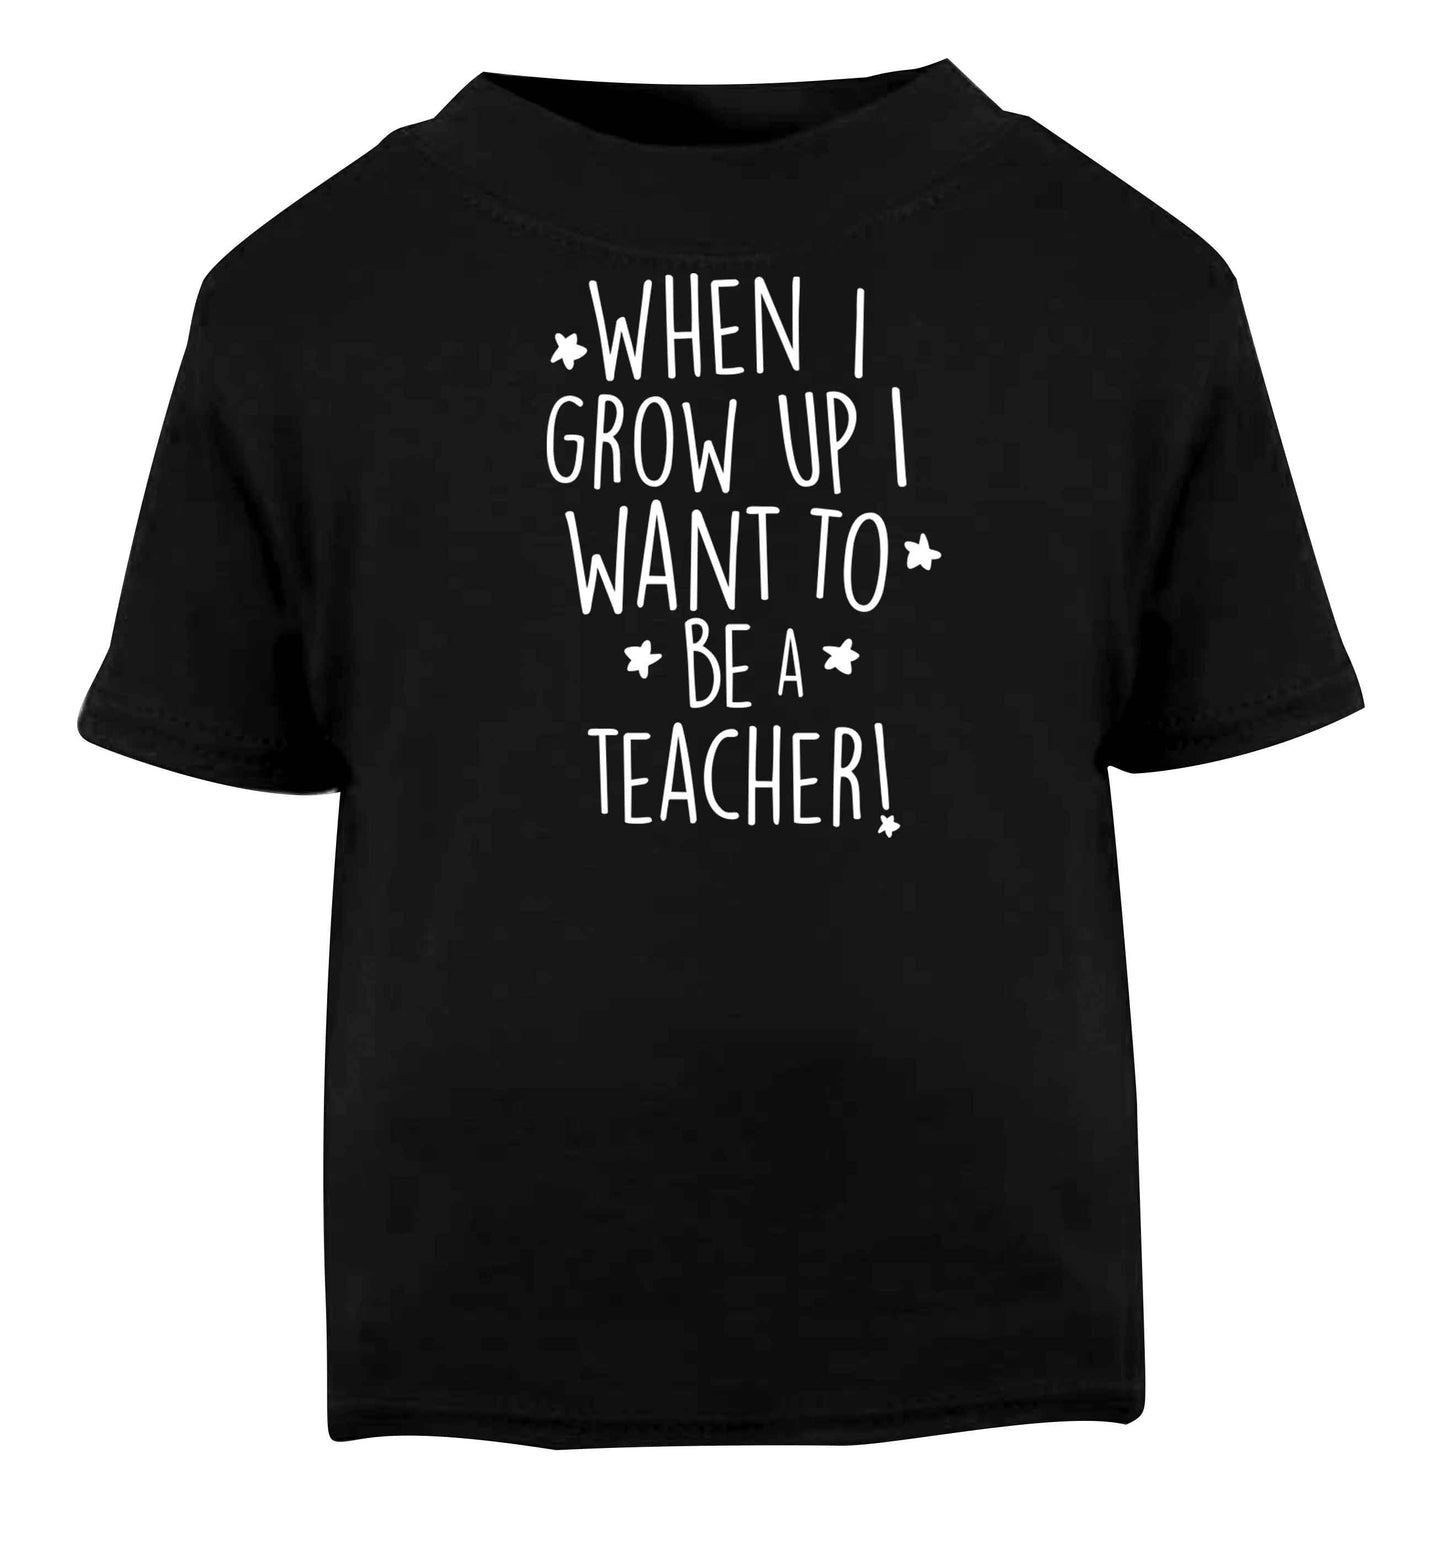 When I grow up I want to be a teacher Black baby toddler Tshirt 2 years